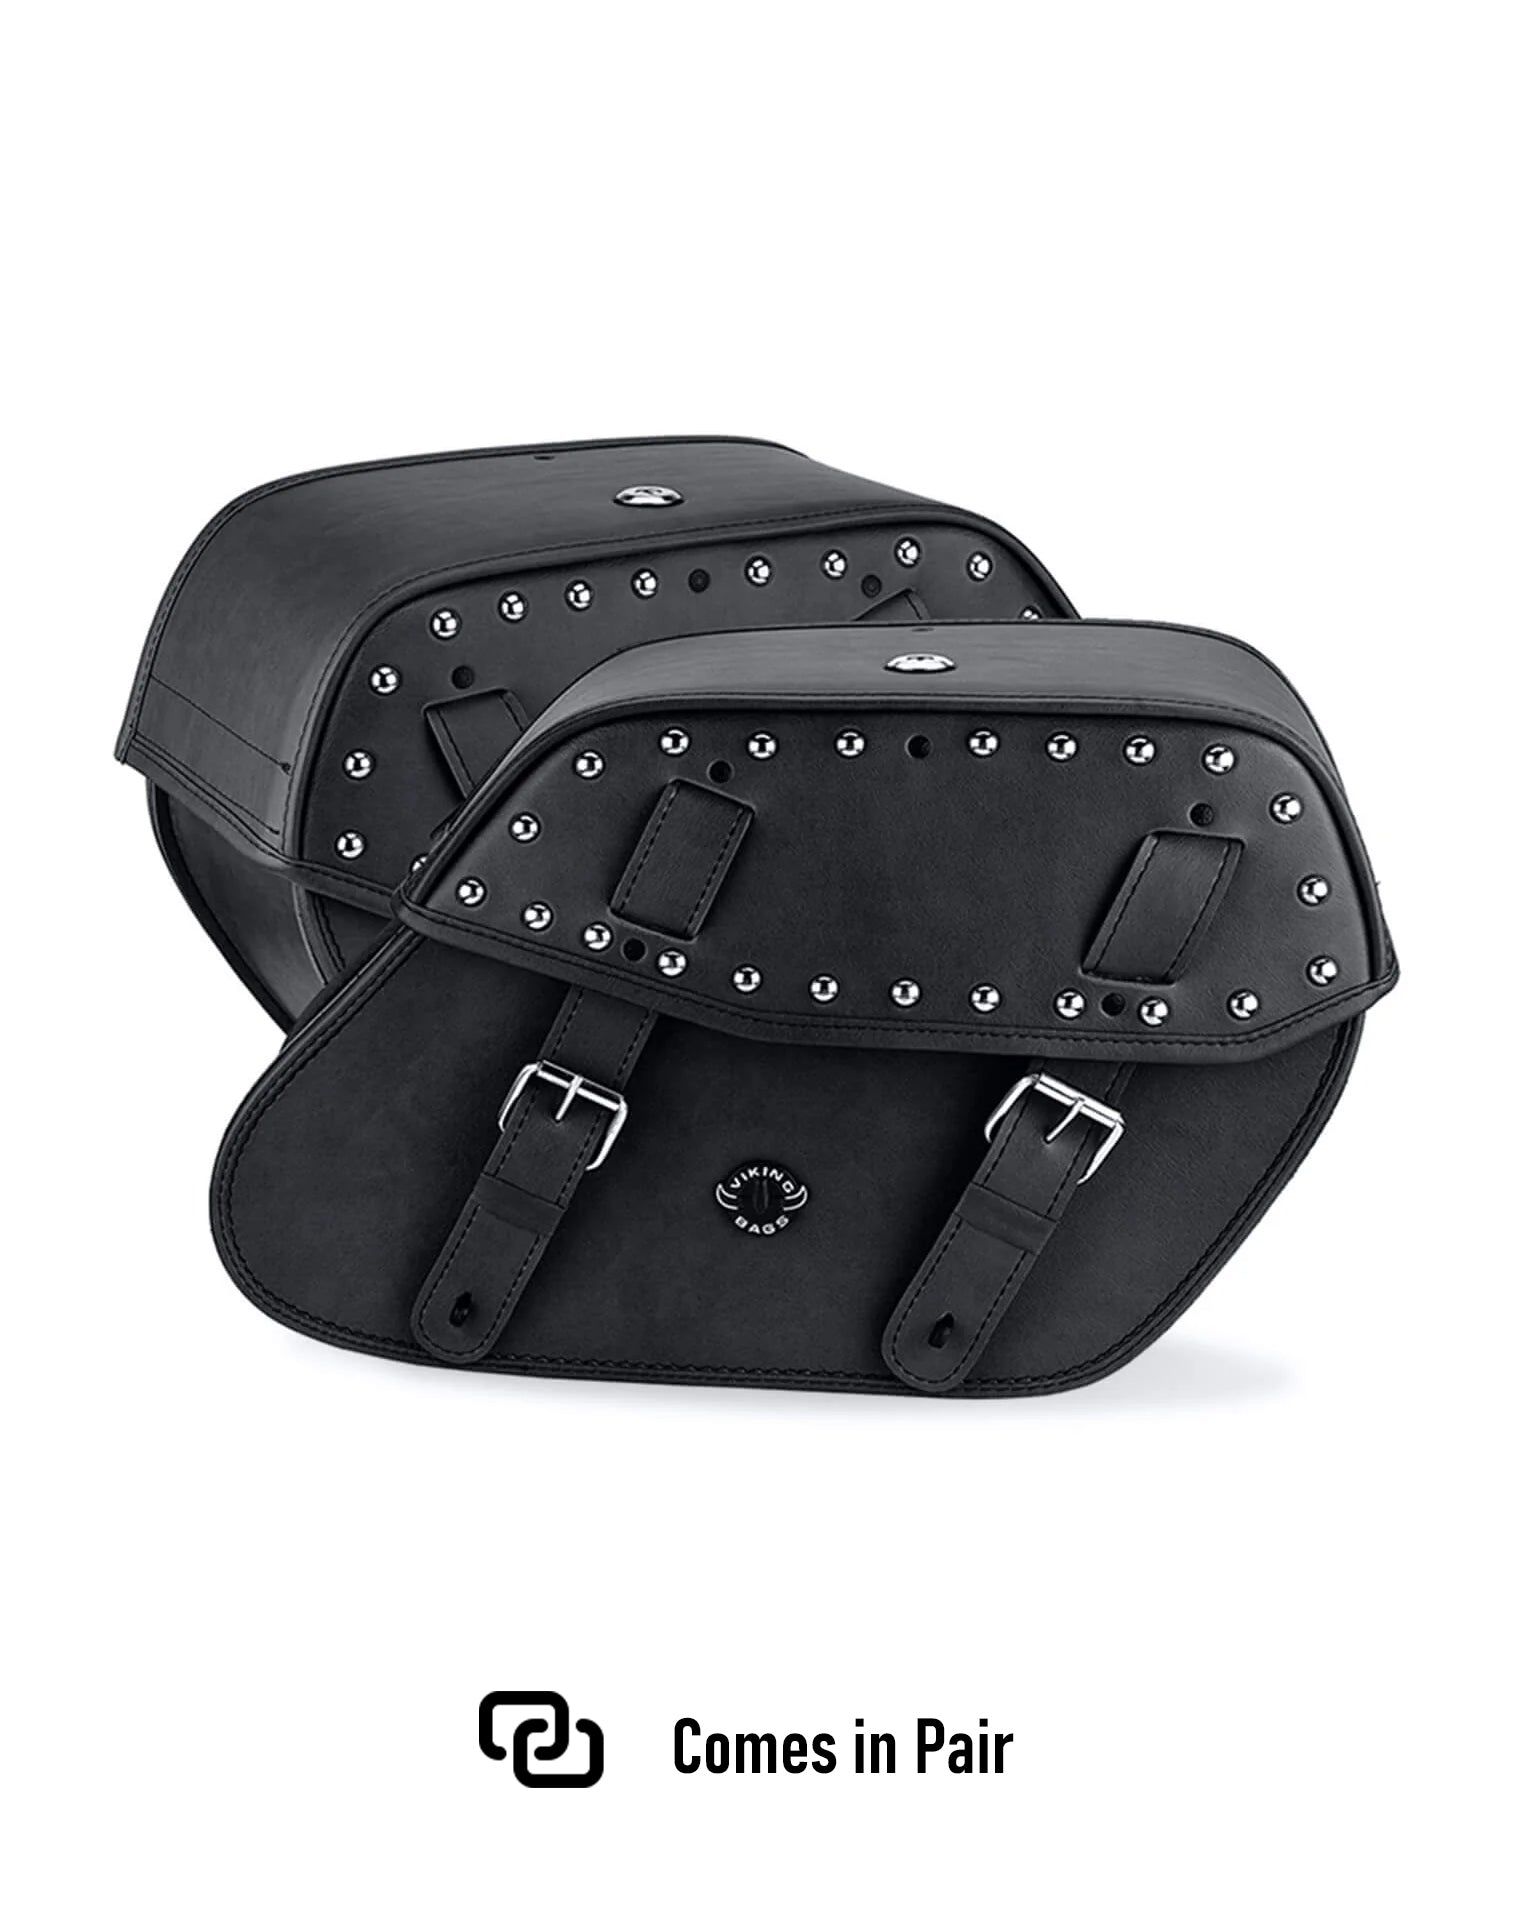 Viking Odin Large Studded Leather Motorcycle Saddlebags For Harley Softail Fat Boy Lo Flstfb Weather Resistant Bags Comes in Pair